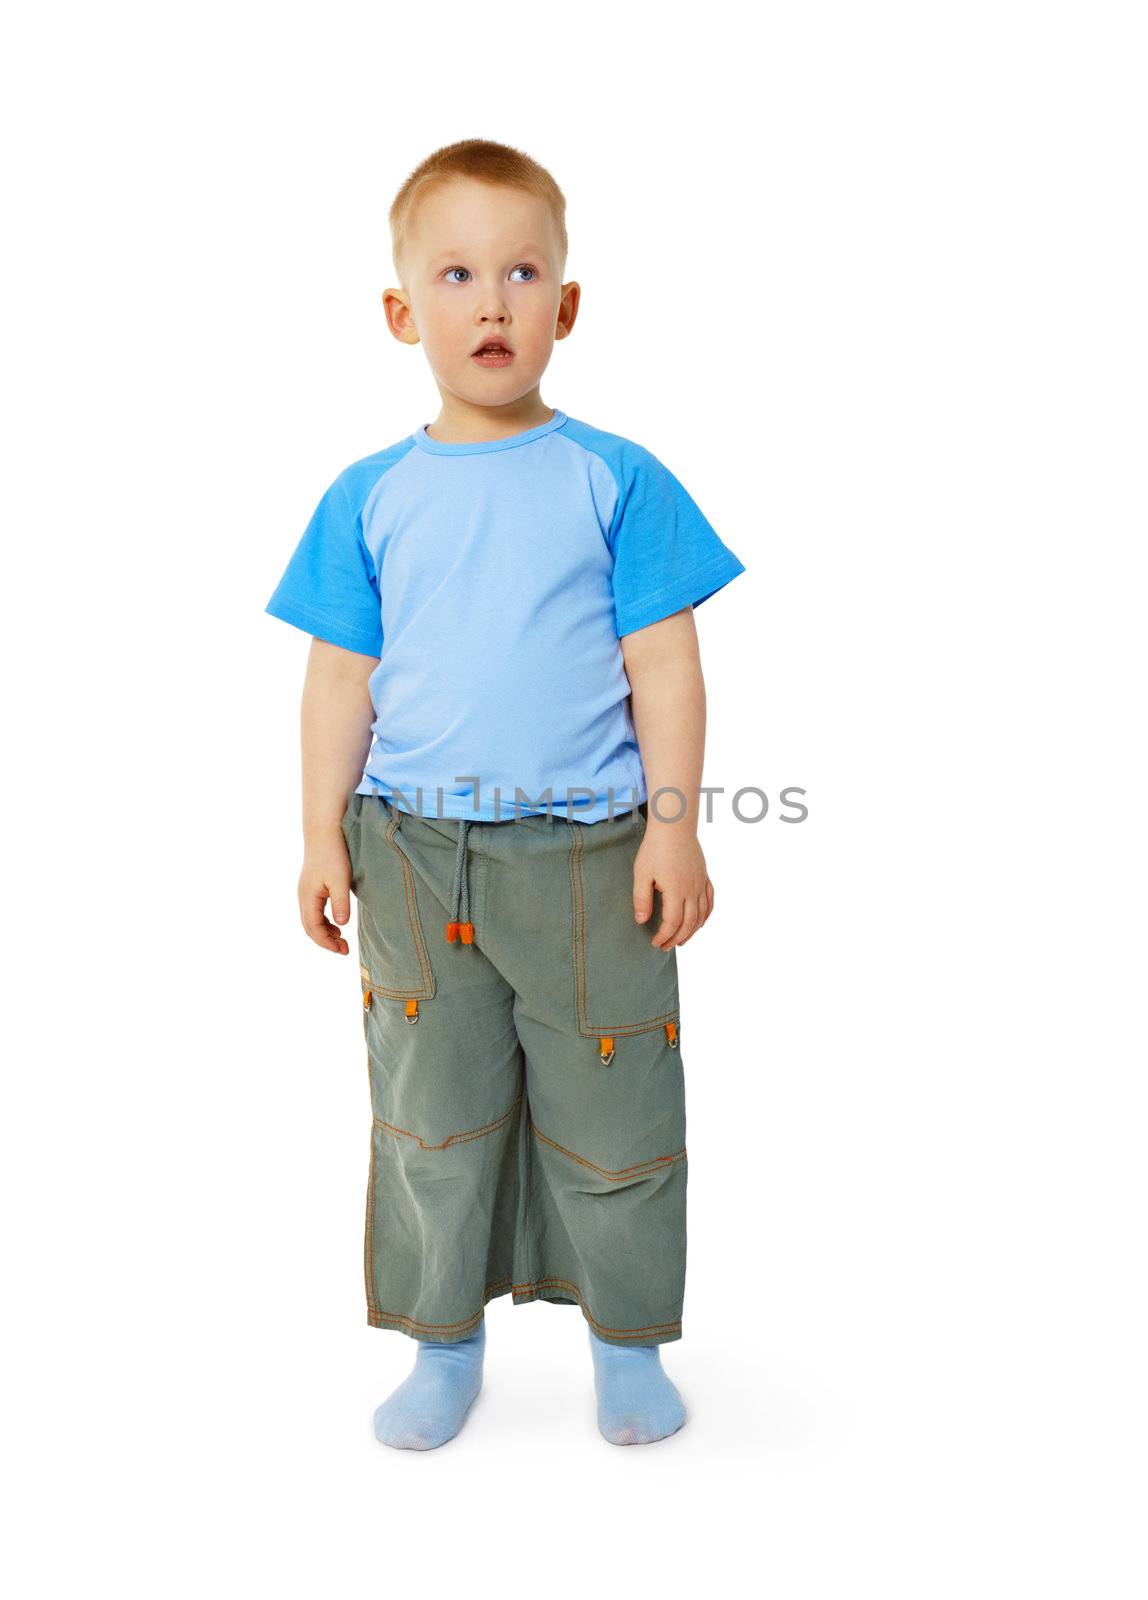 Funny little boy stands isolated on white background